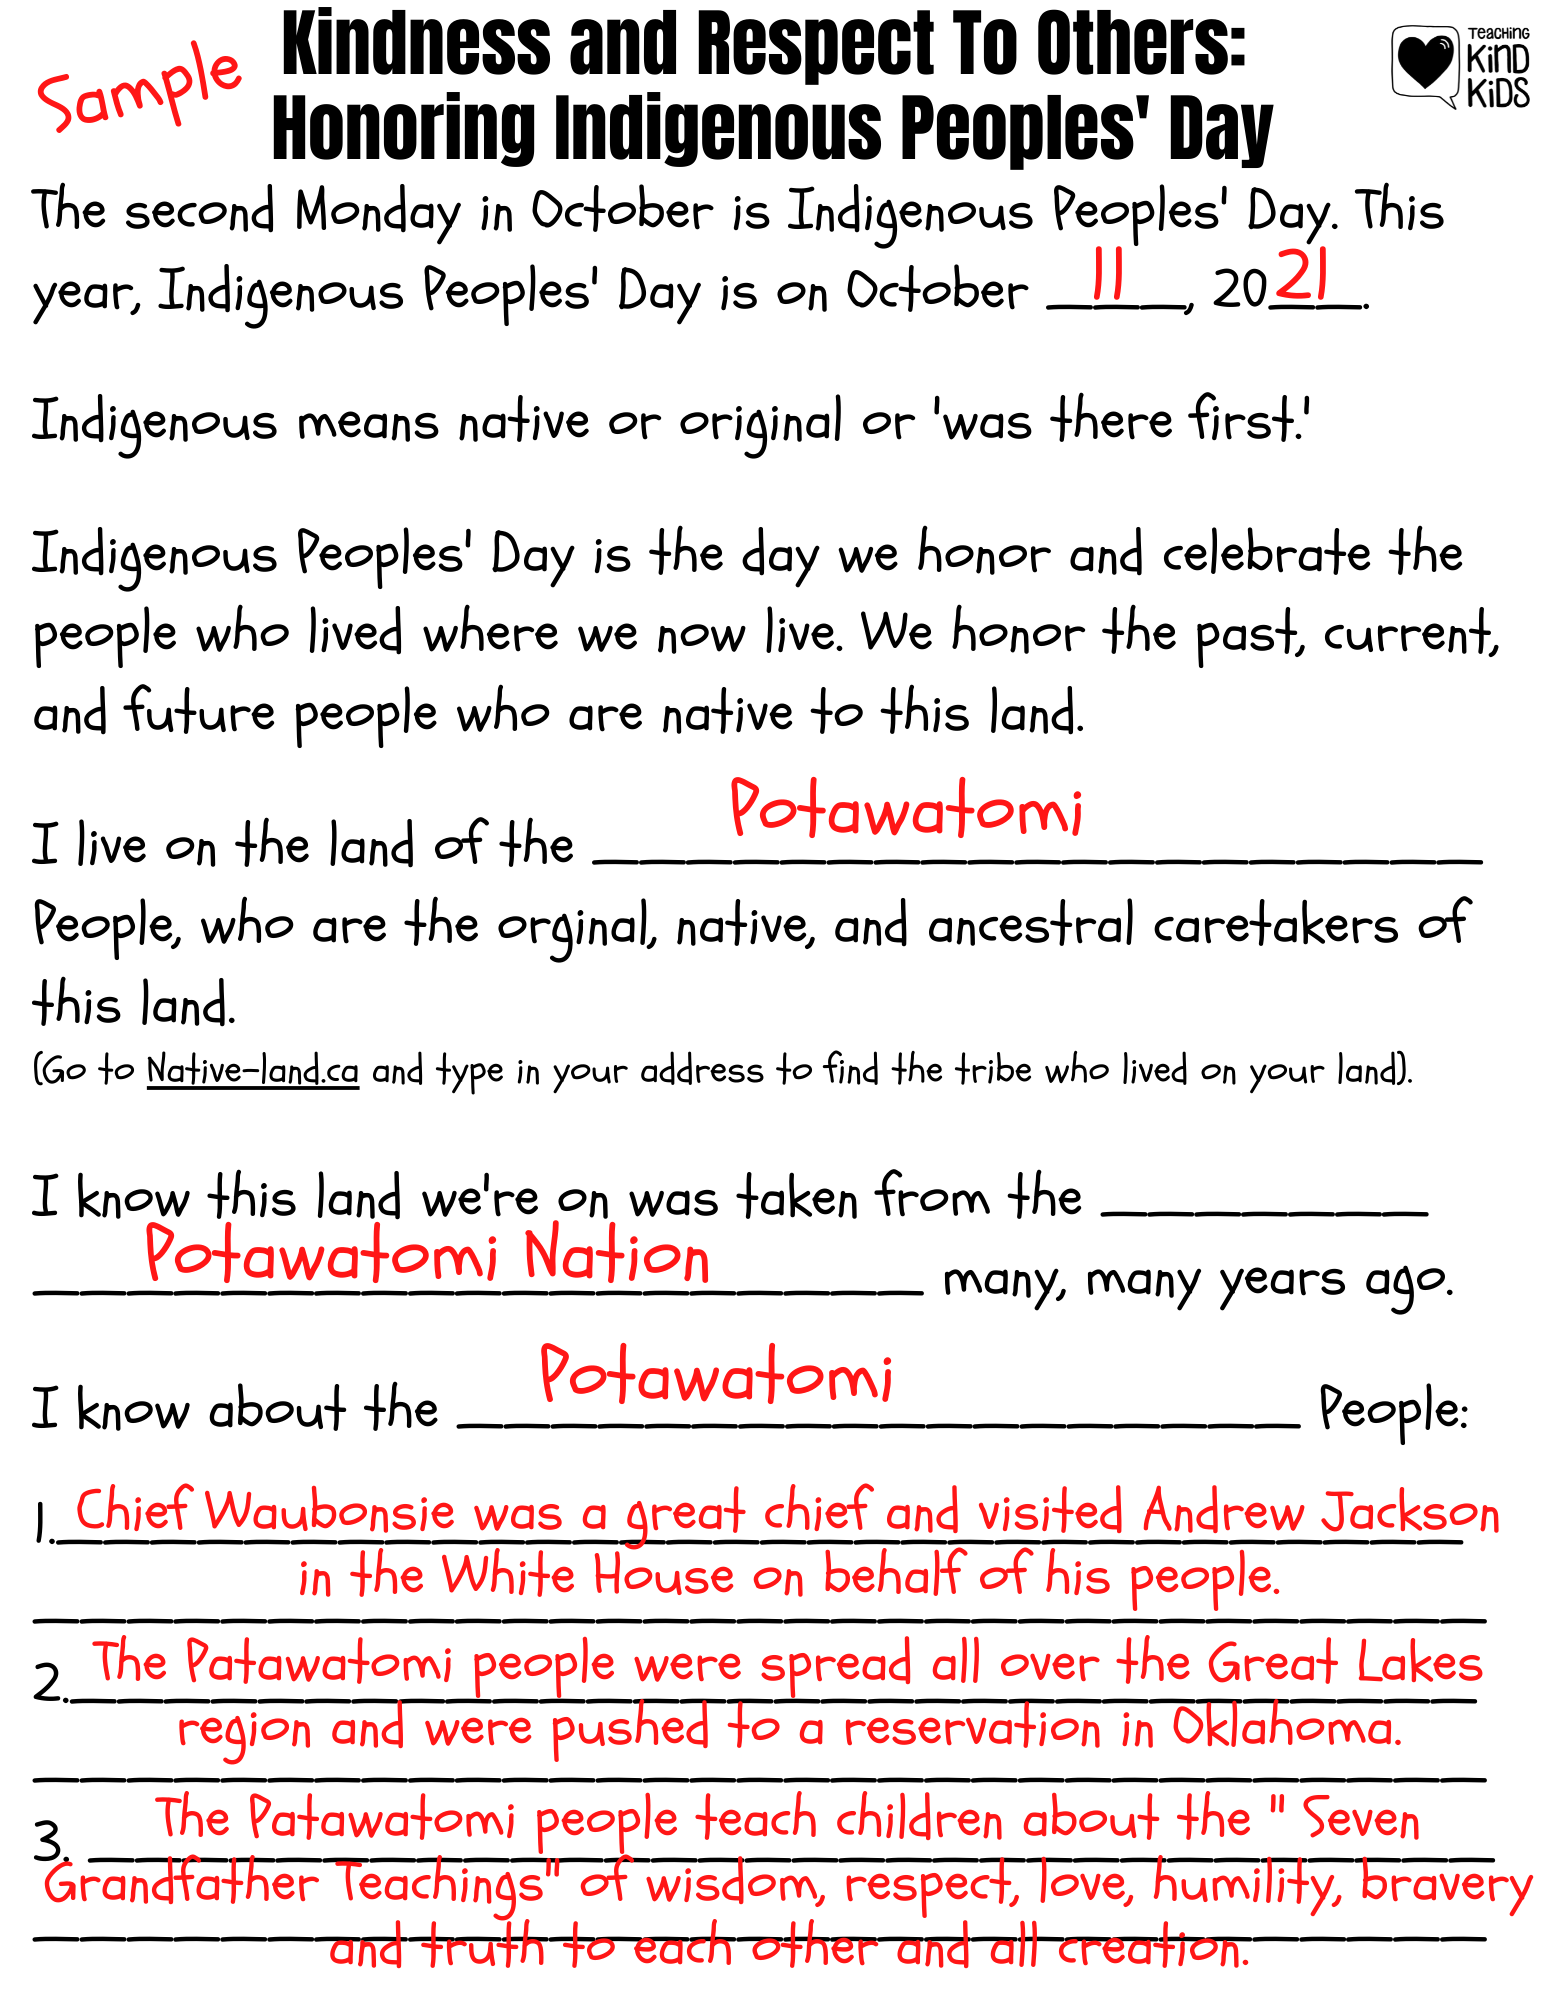 Honor and celebrate Indigenous Peoples' Day with this free printable to help students understand whose land they're living on in a respectful and kind way. 